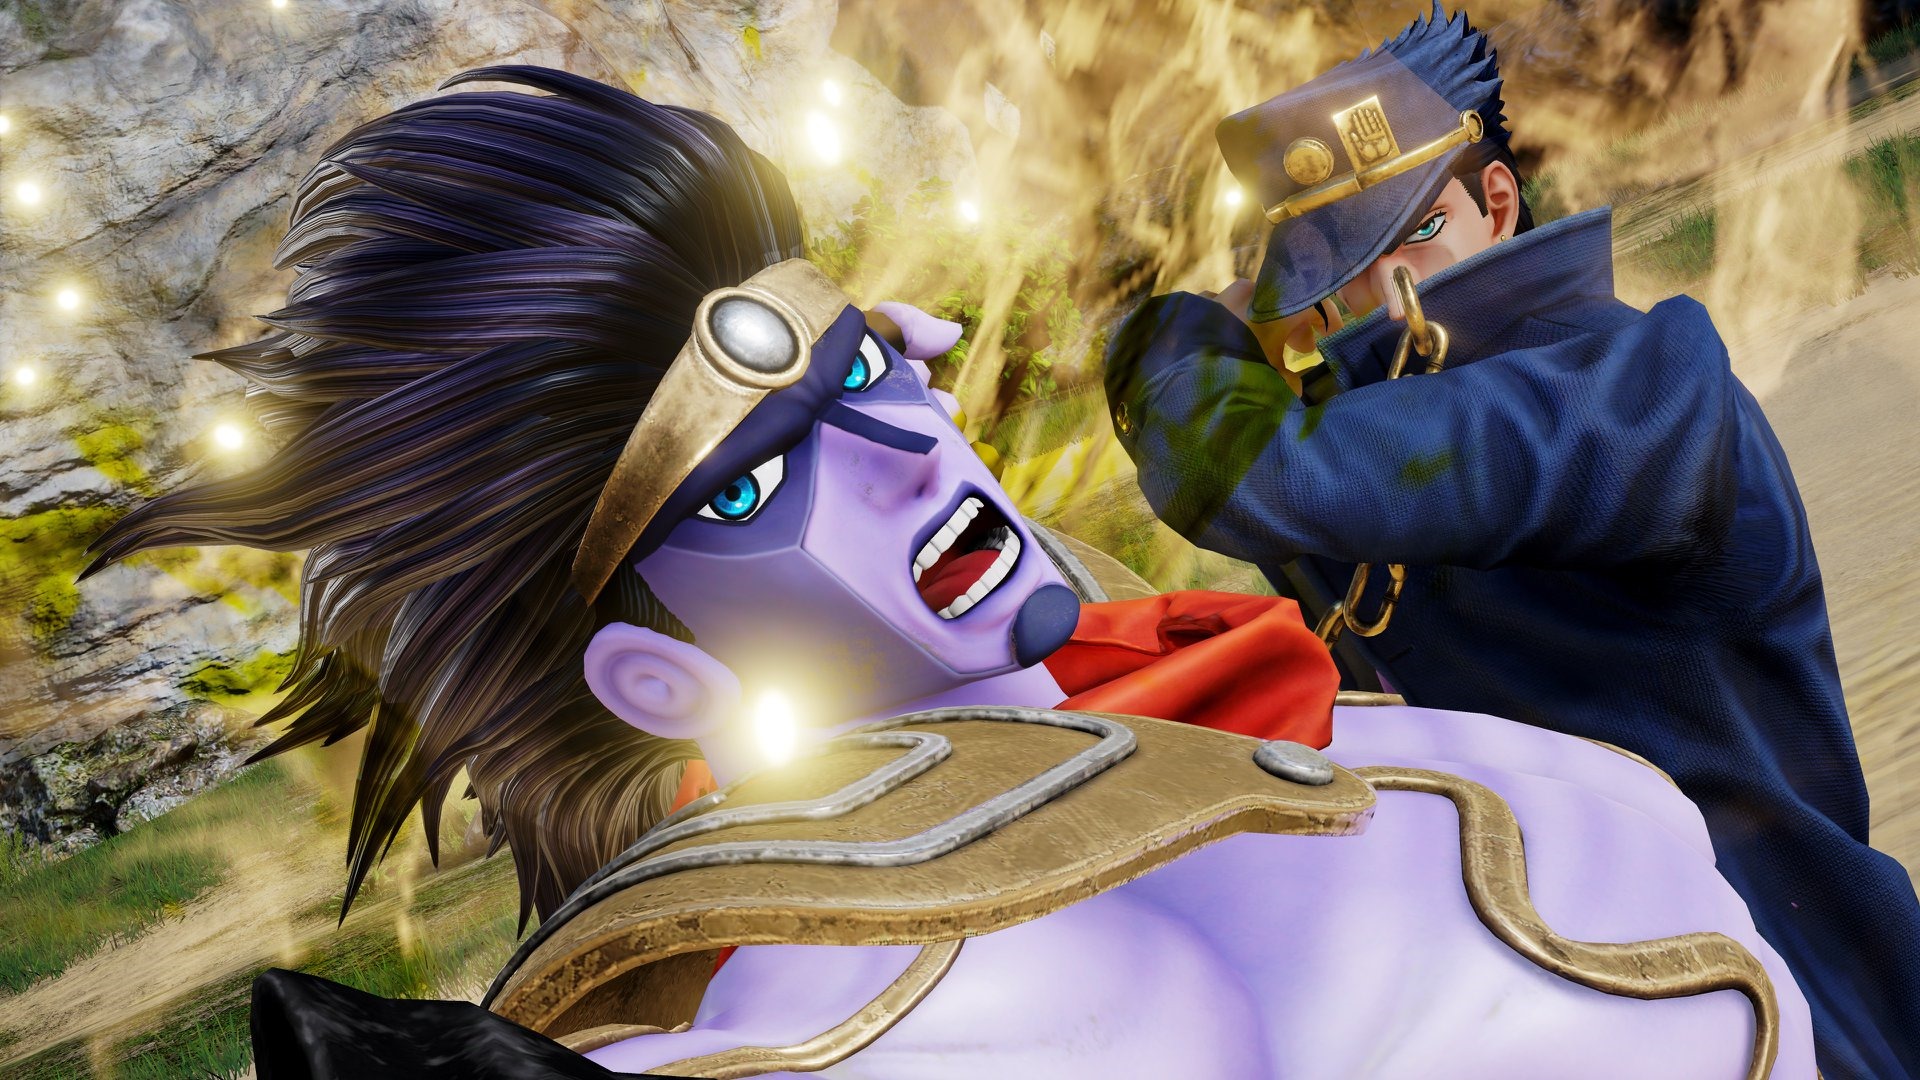 Jotaro Kujo screenshots, images and pictures - Giant Bomb